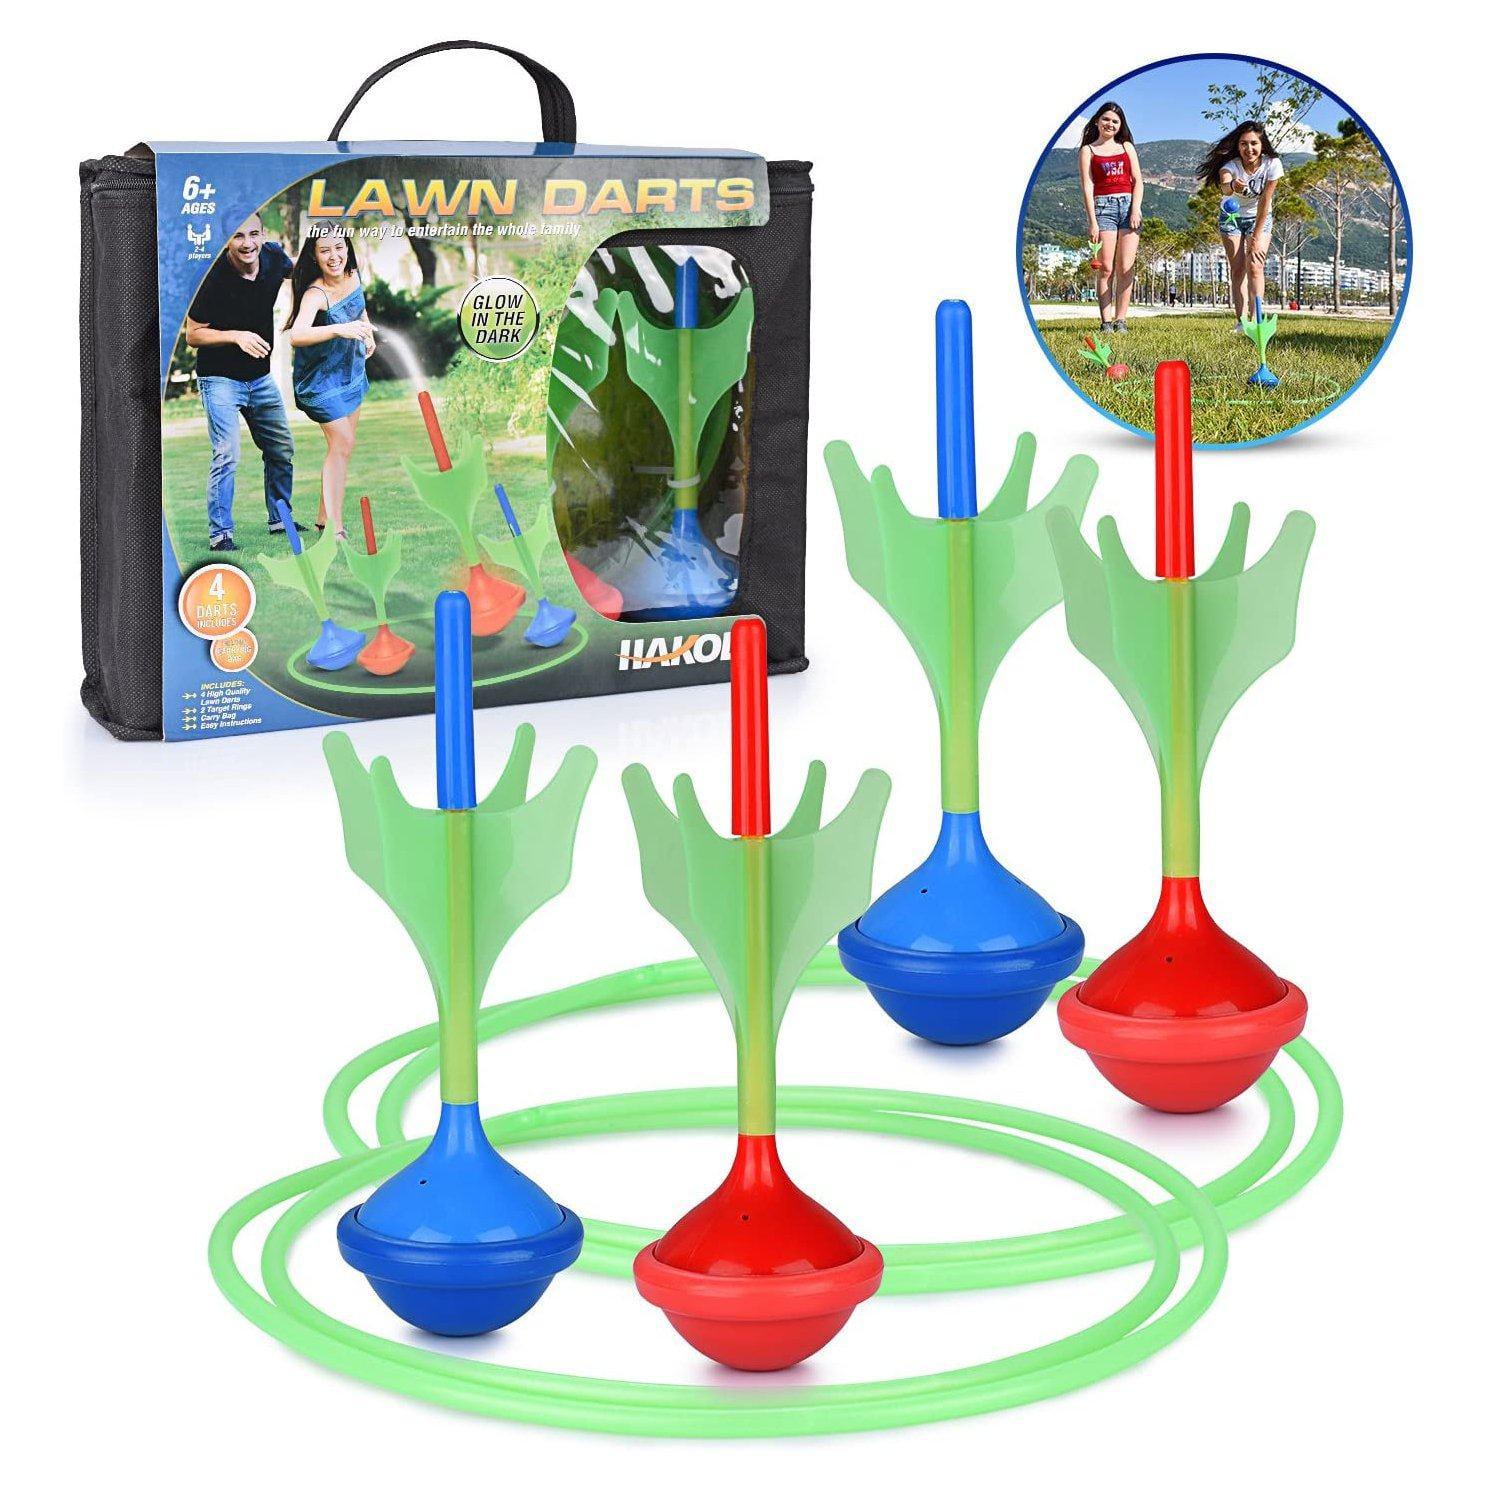 Glow in The Dark Lawn Darts Game Outdoor Backyard Toy for Kids &amp; Adults